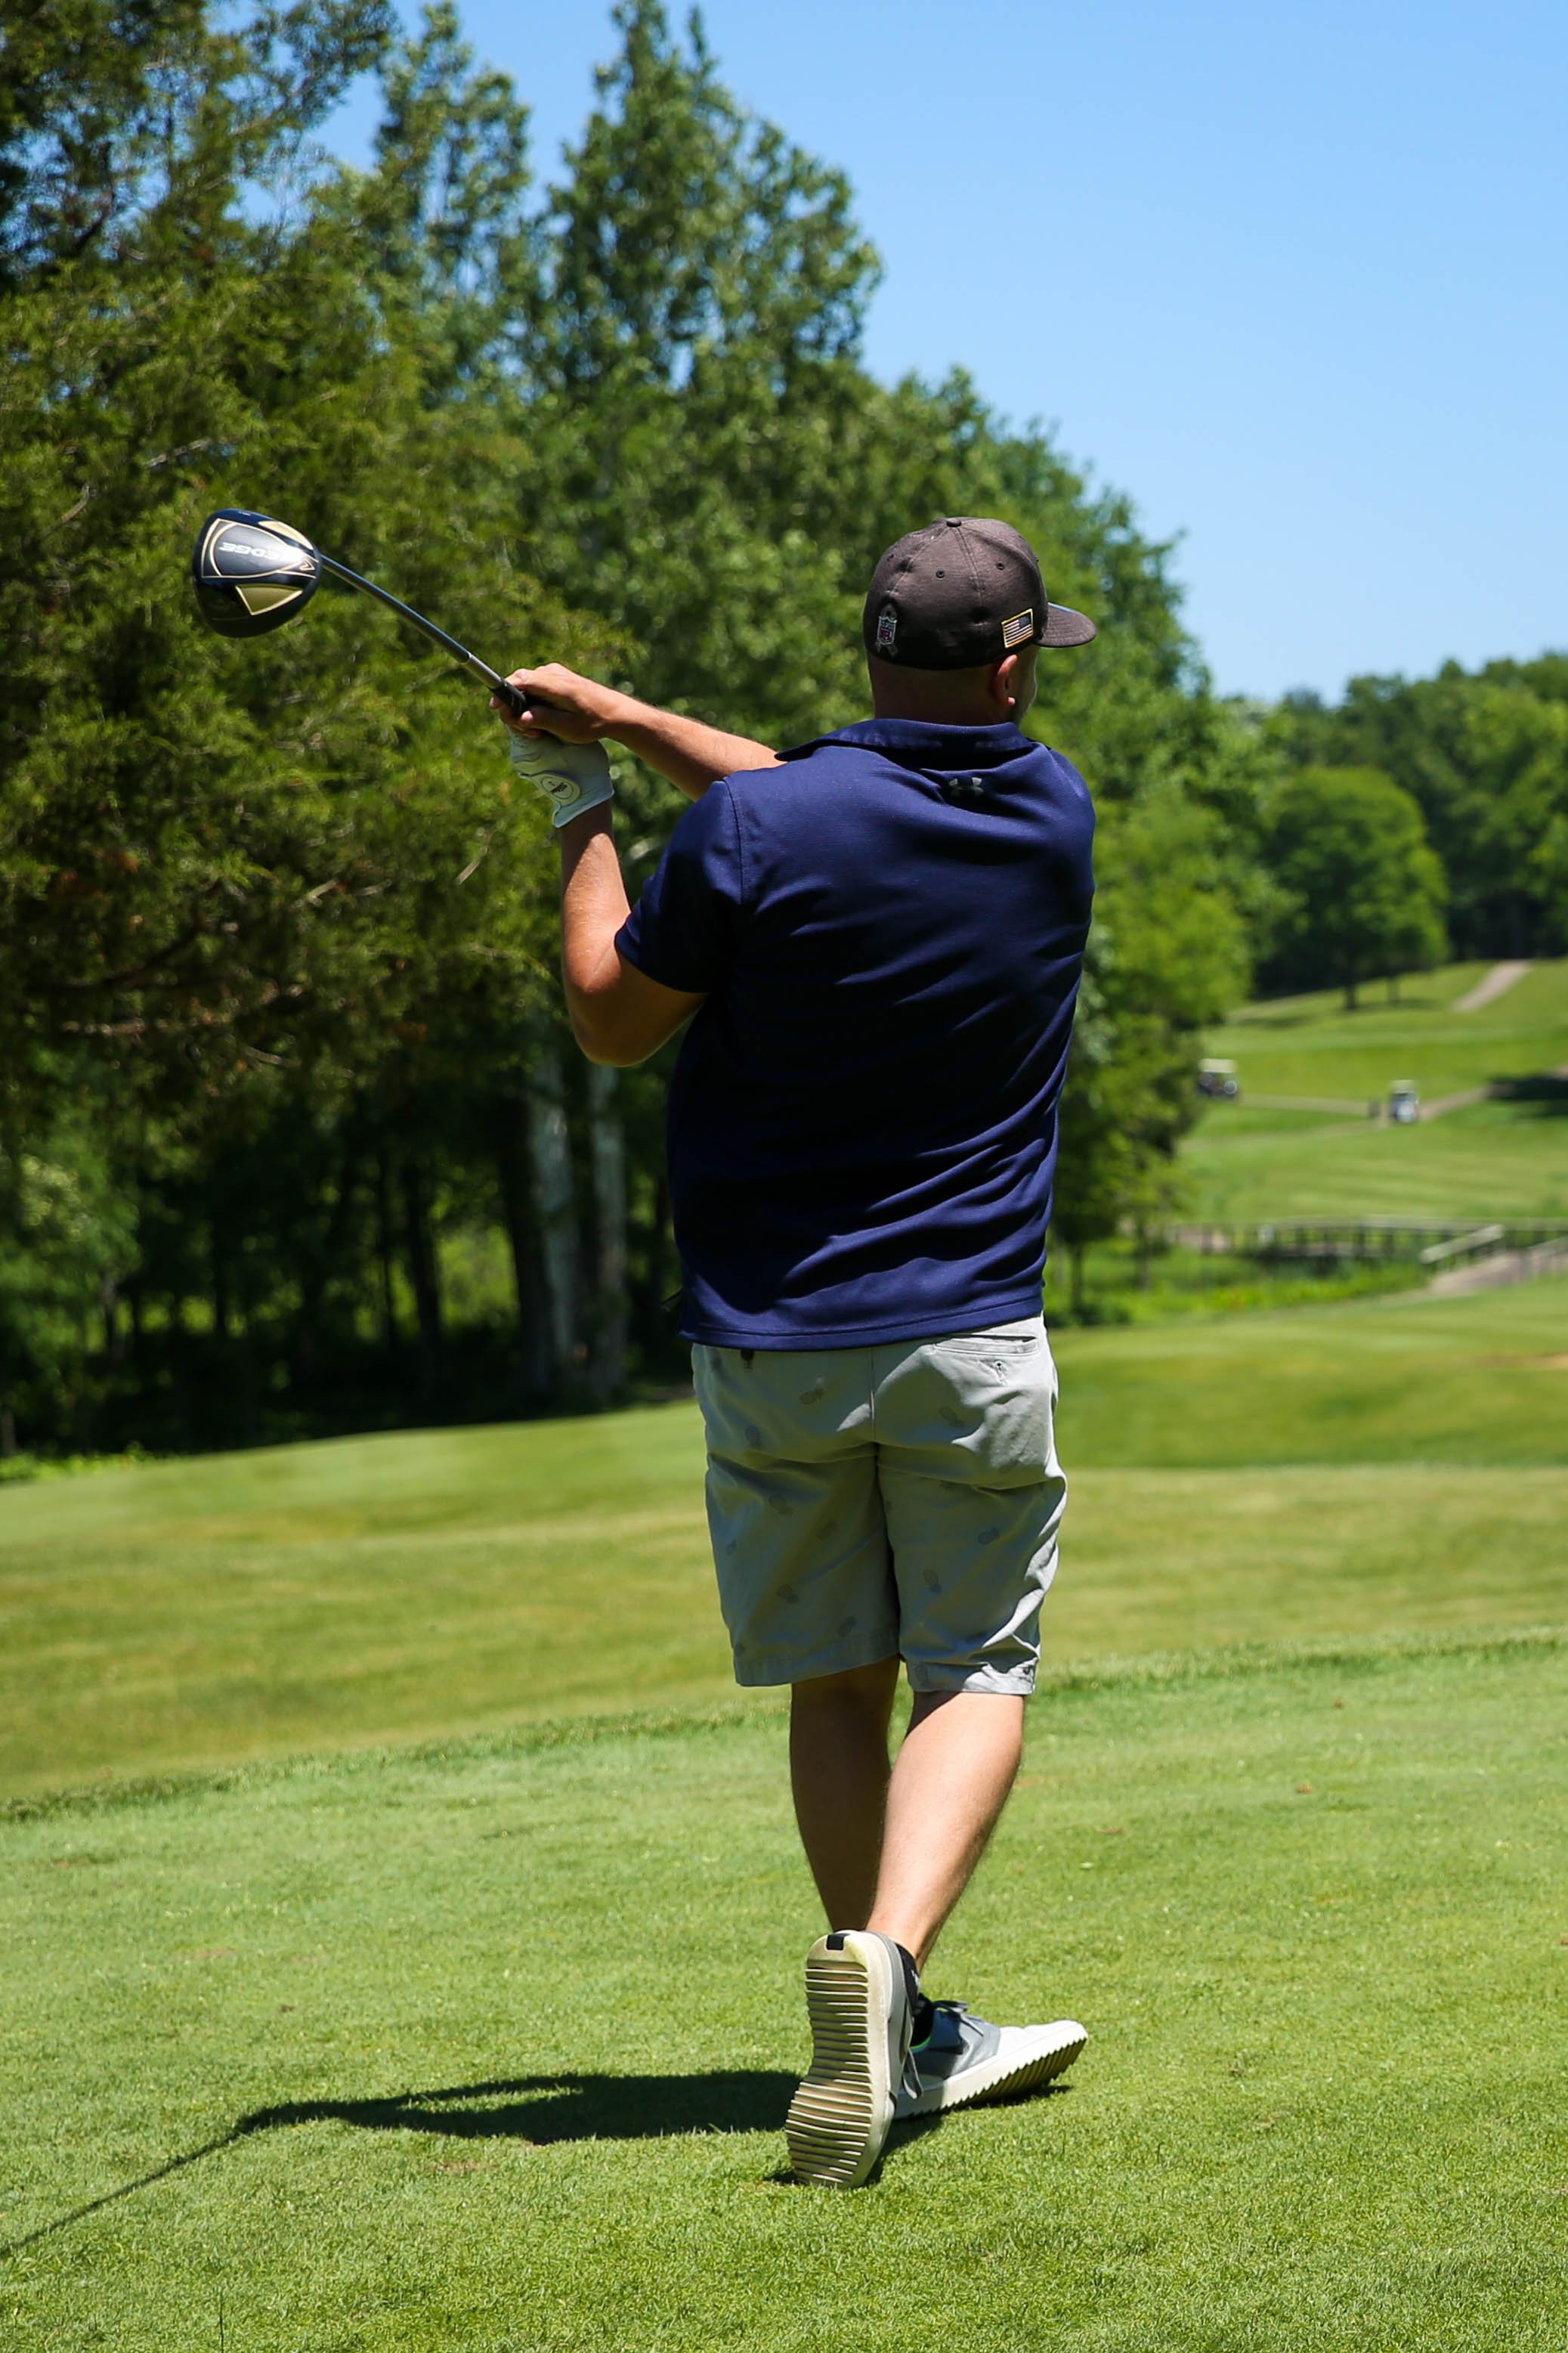 0121 MPEF Golf Outing 2022.jpg